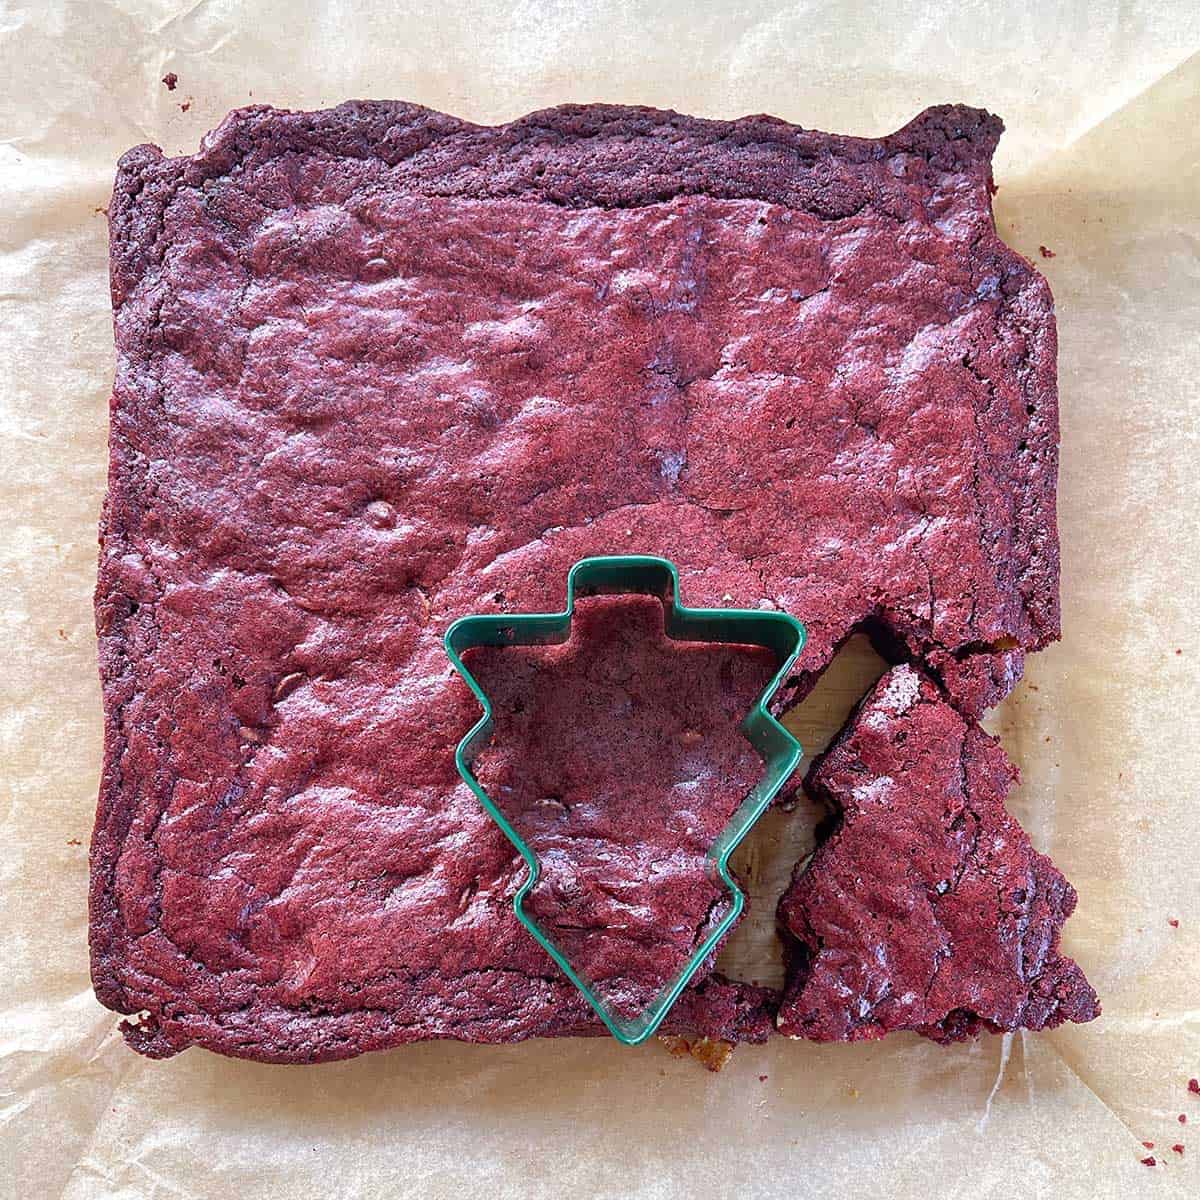 Red Velvet Brownie being cut with a xmas tree cookie cutter.